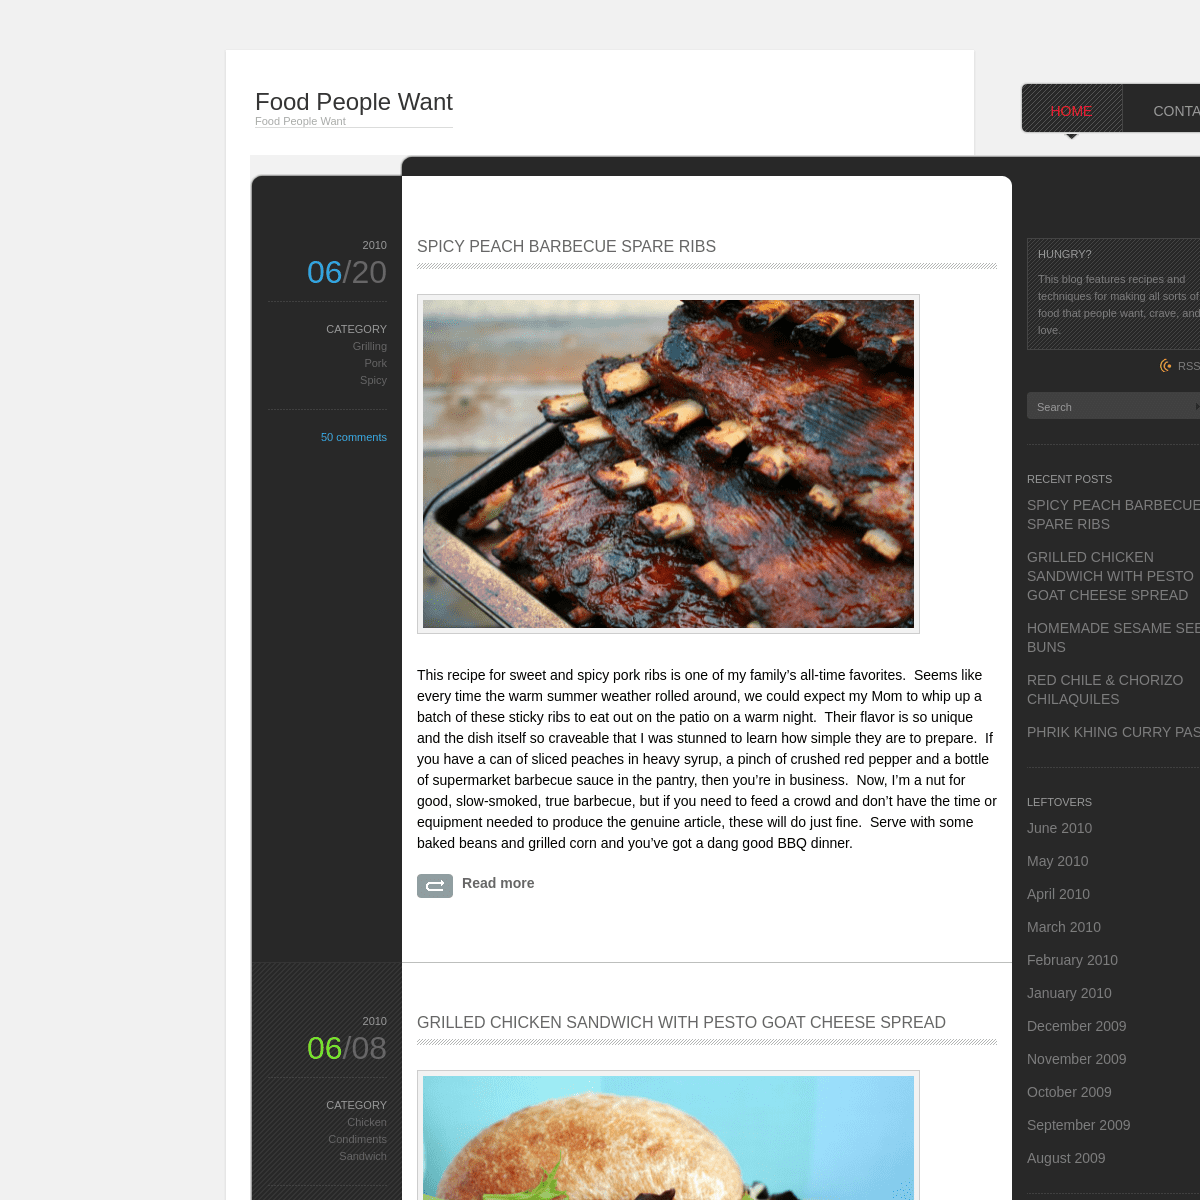 A complete backup of https://foodpeoplewant.com